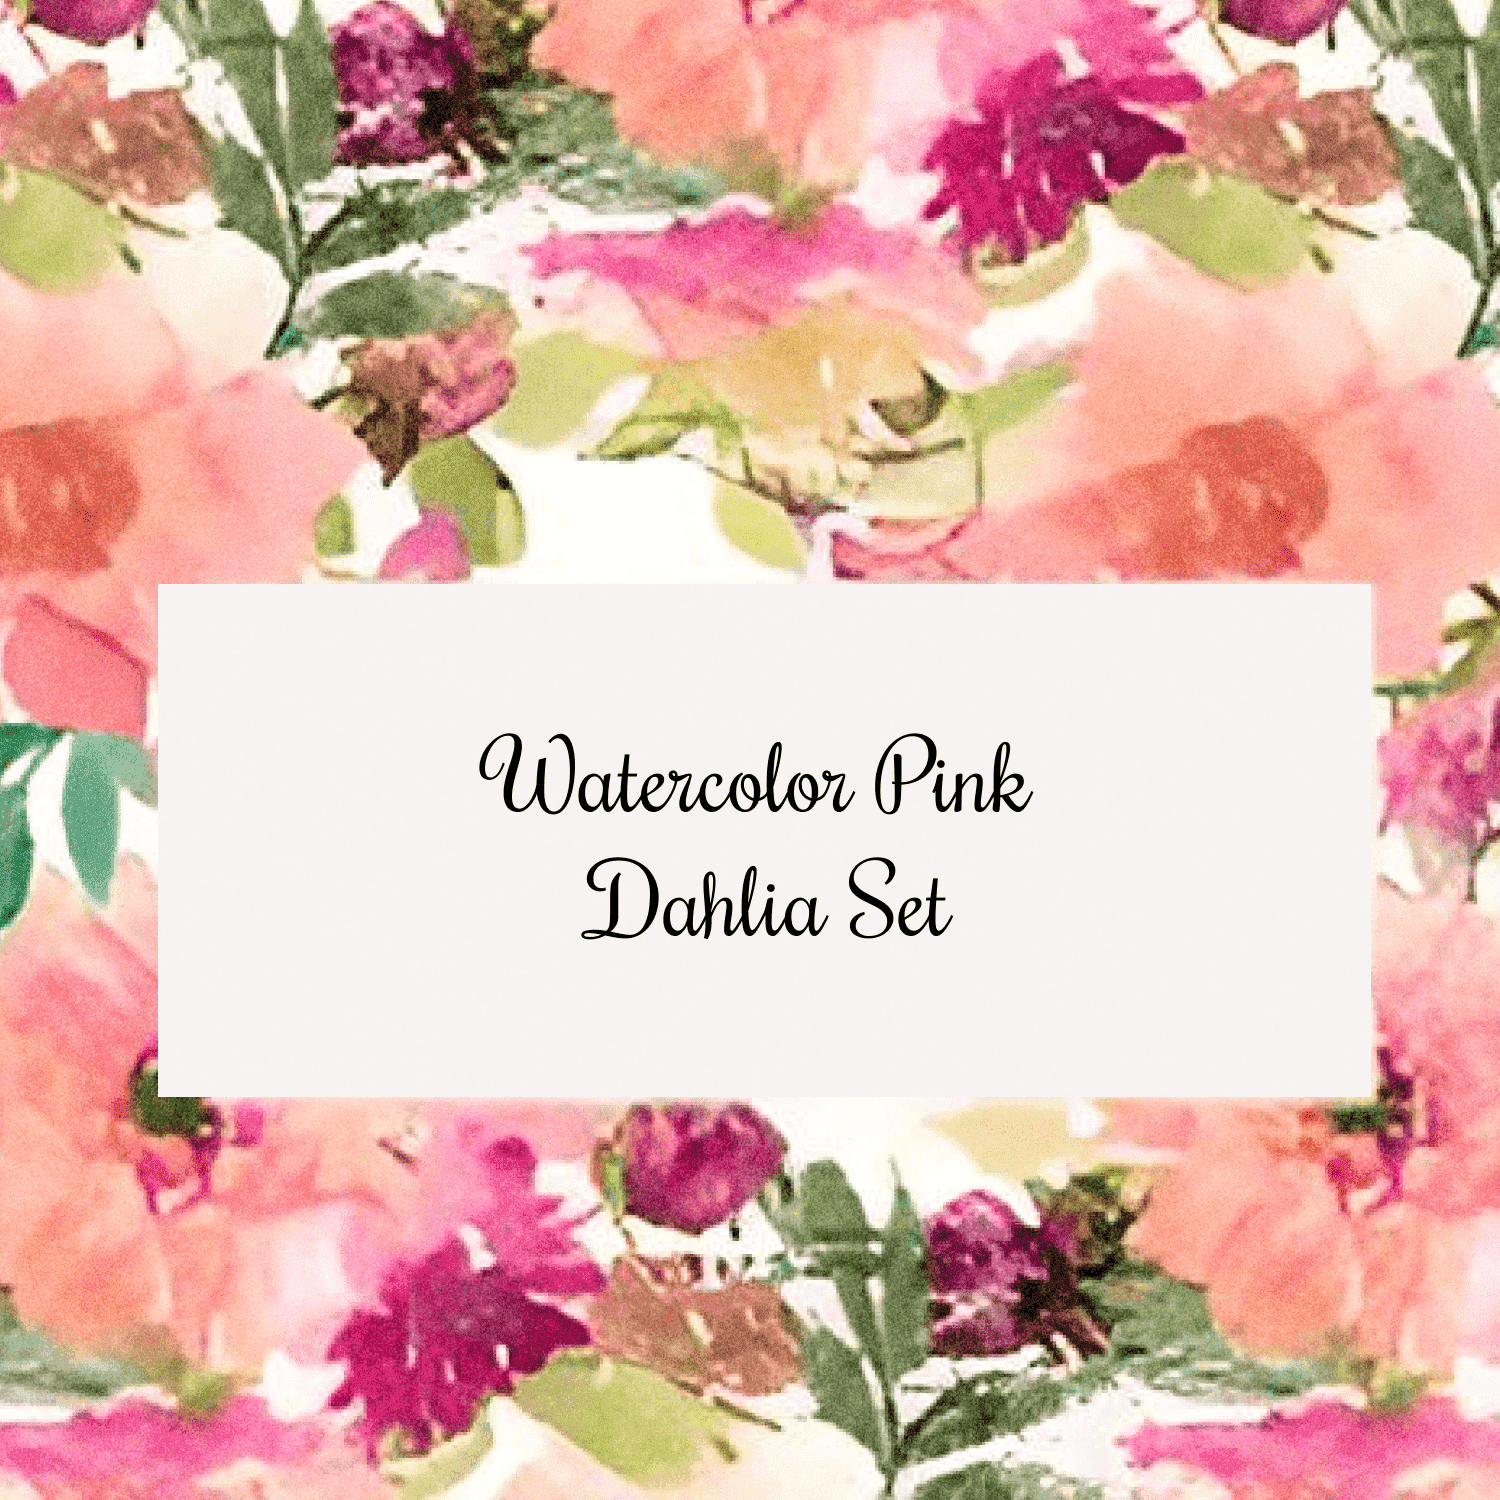 Watercolor Pink Dahlia - Cover Image.